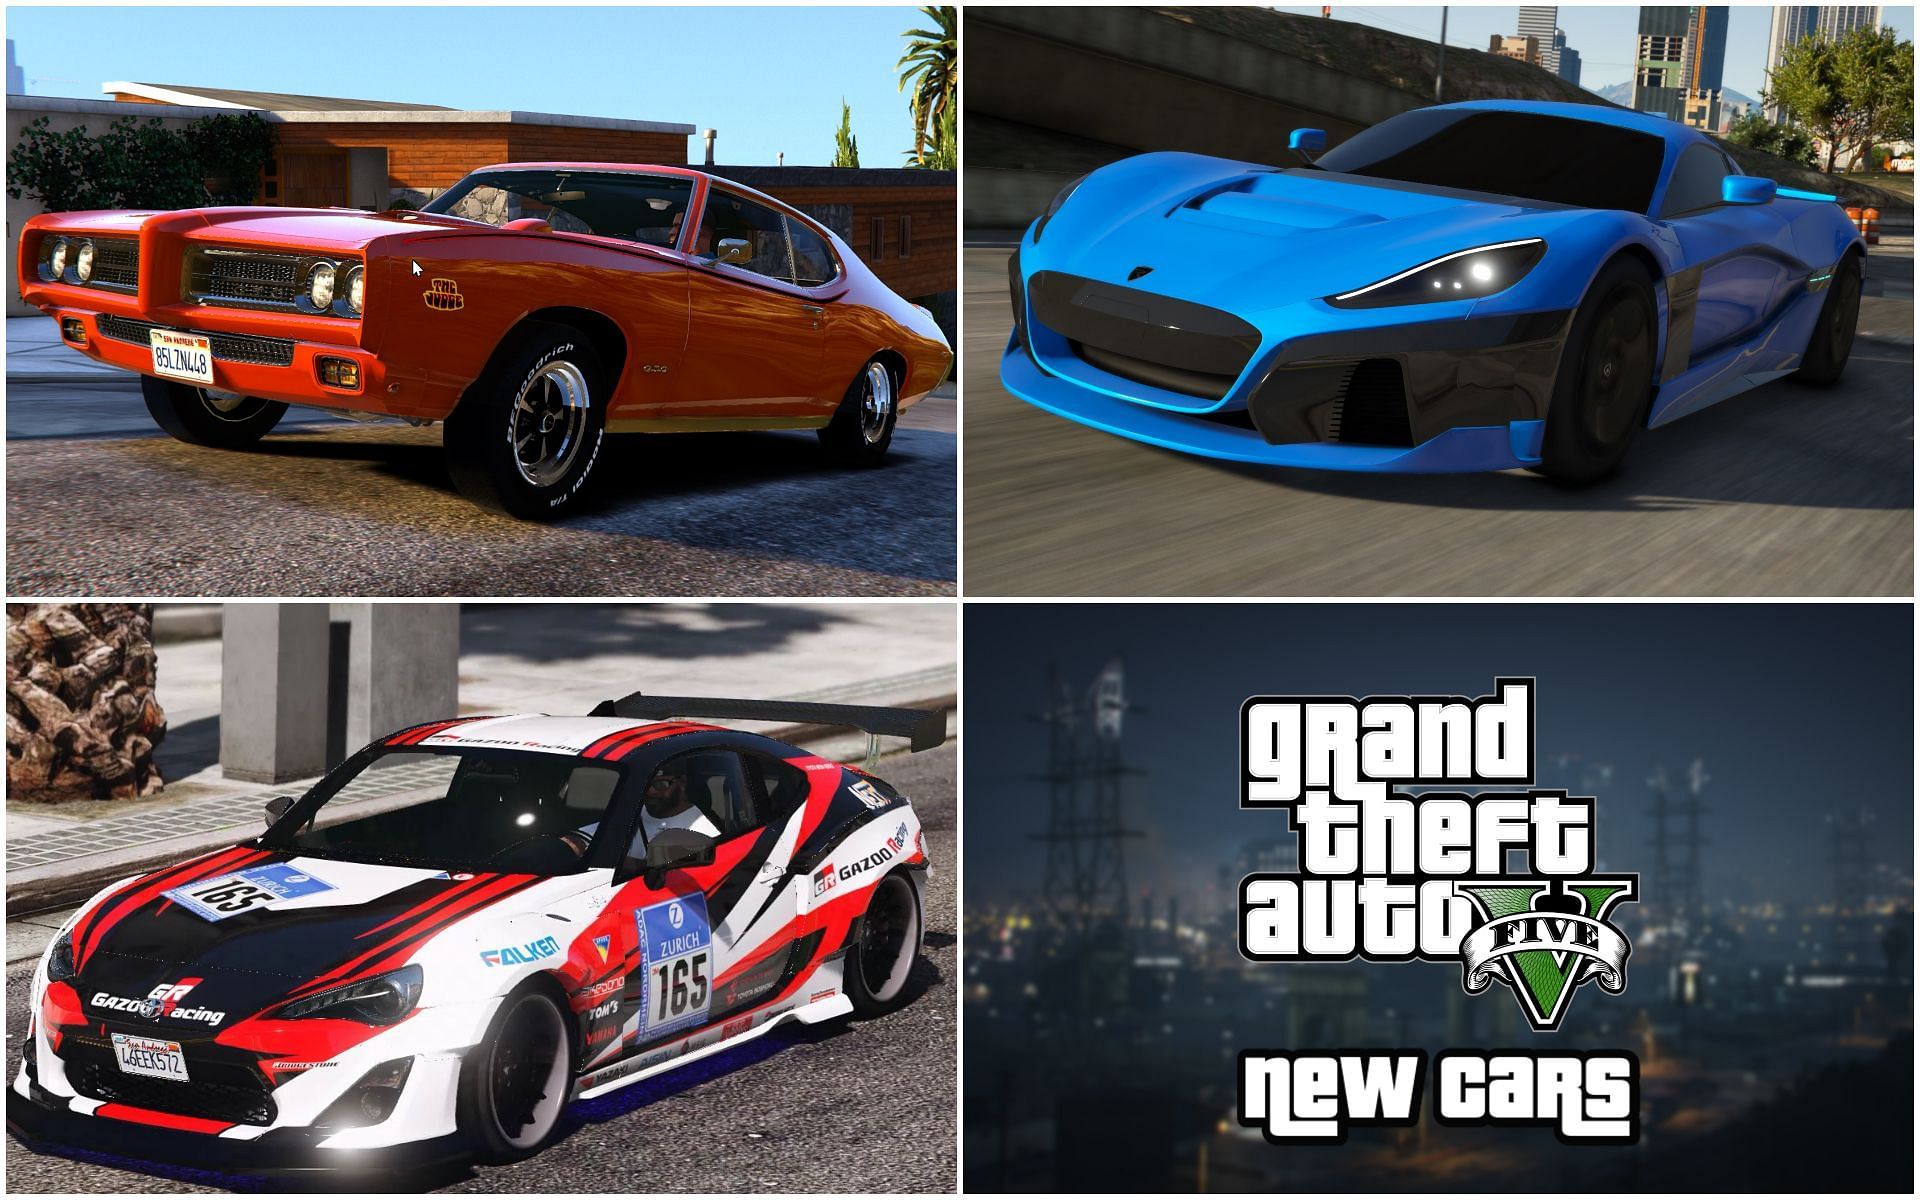 This might be how the new cars will appear in-game (Images via GTA5-Mods.com)